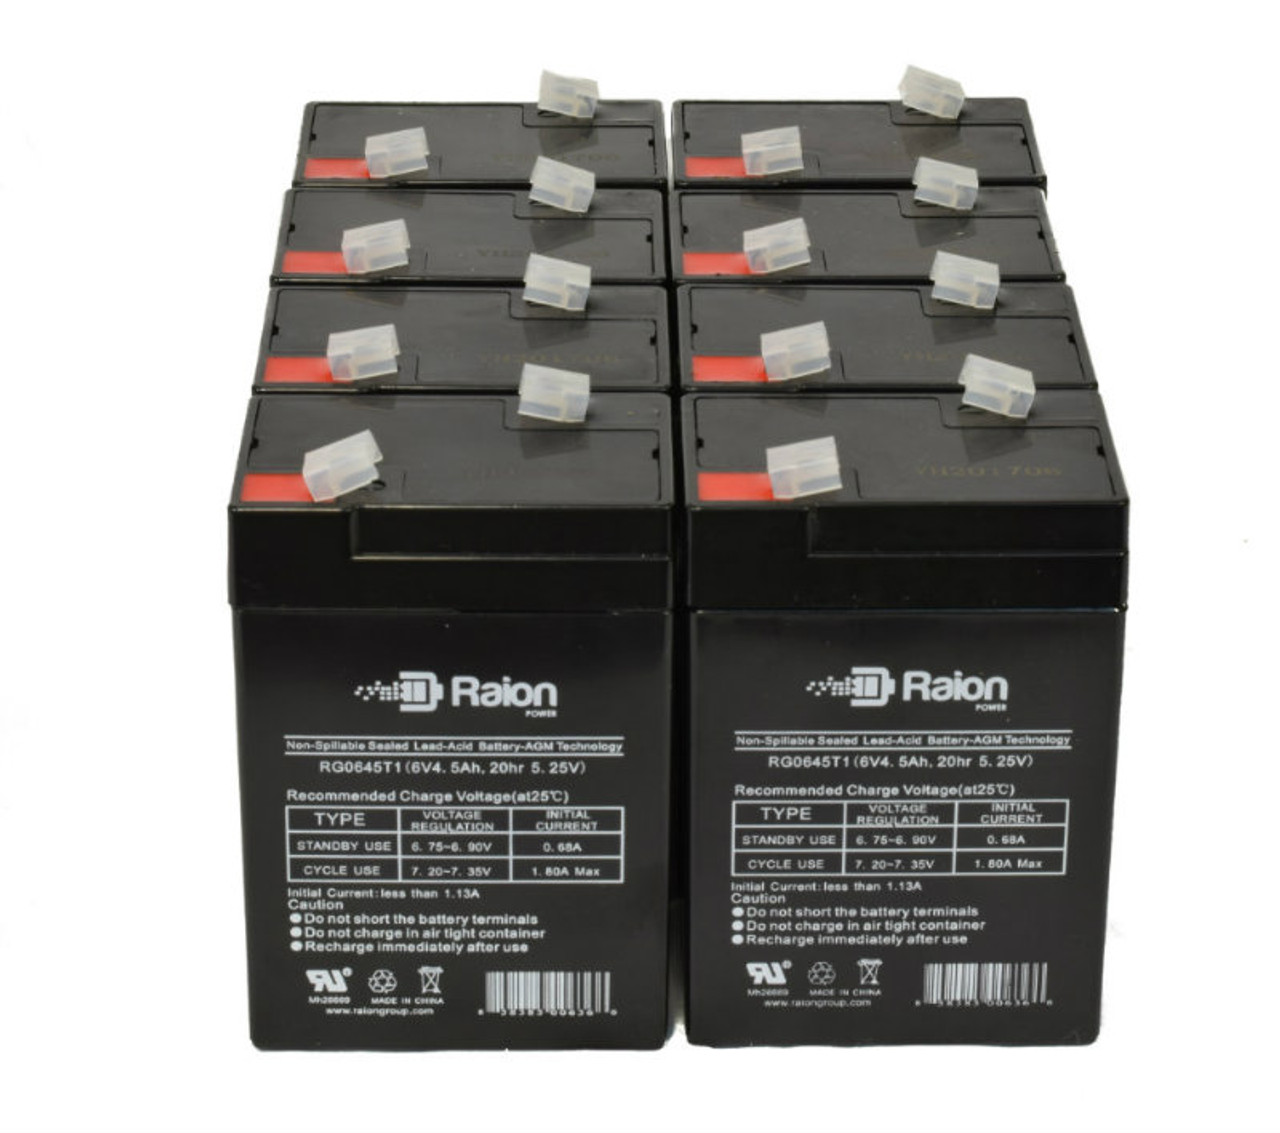 Raion Power 6 Volt 4.5Ah RG0645T1 Replacement Battery for Teledyne LASER - 8 Pack